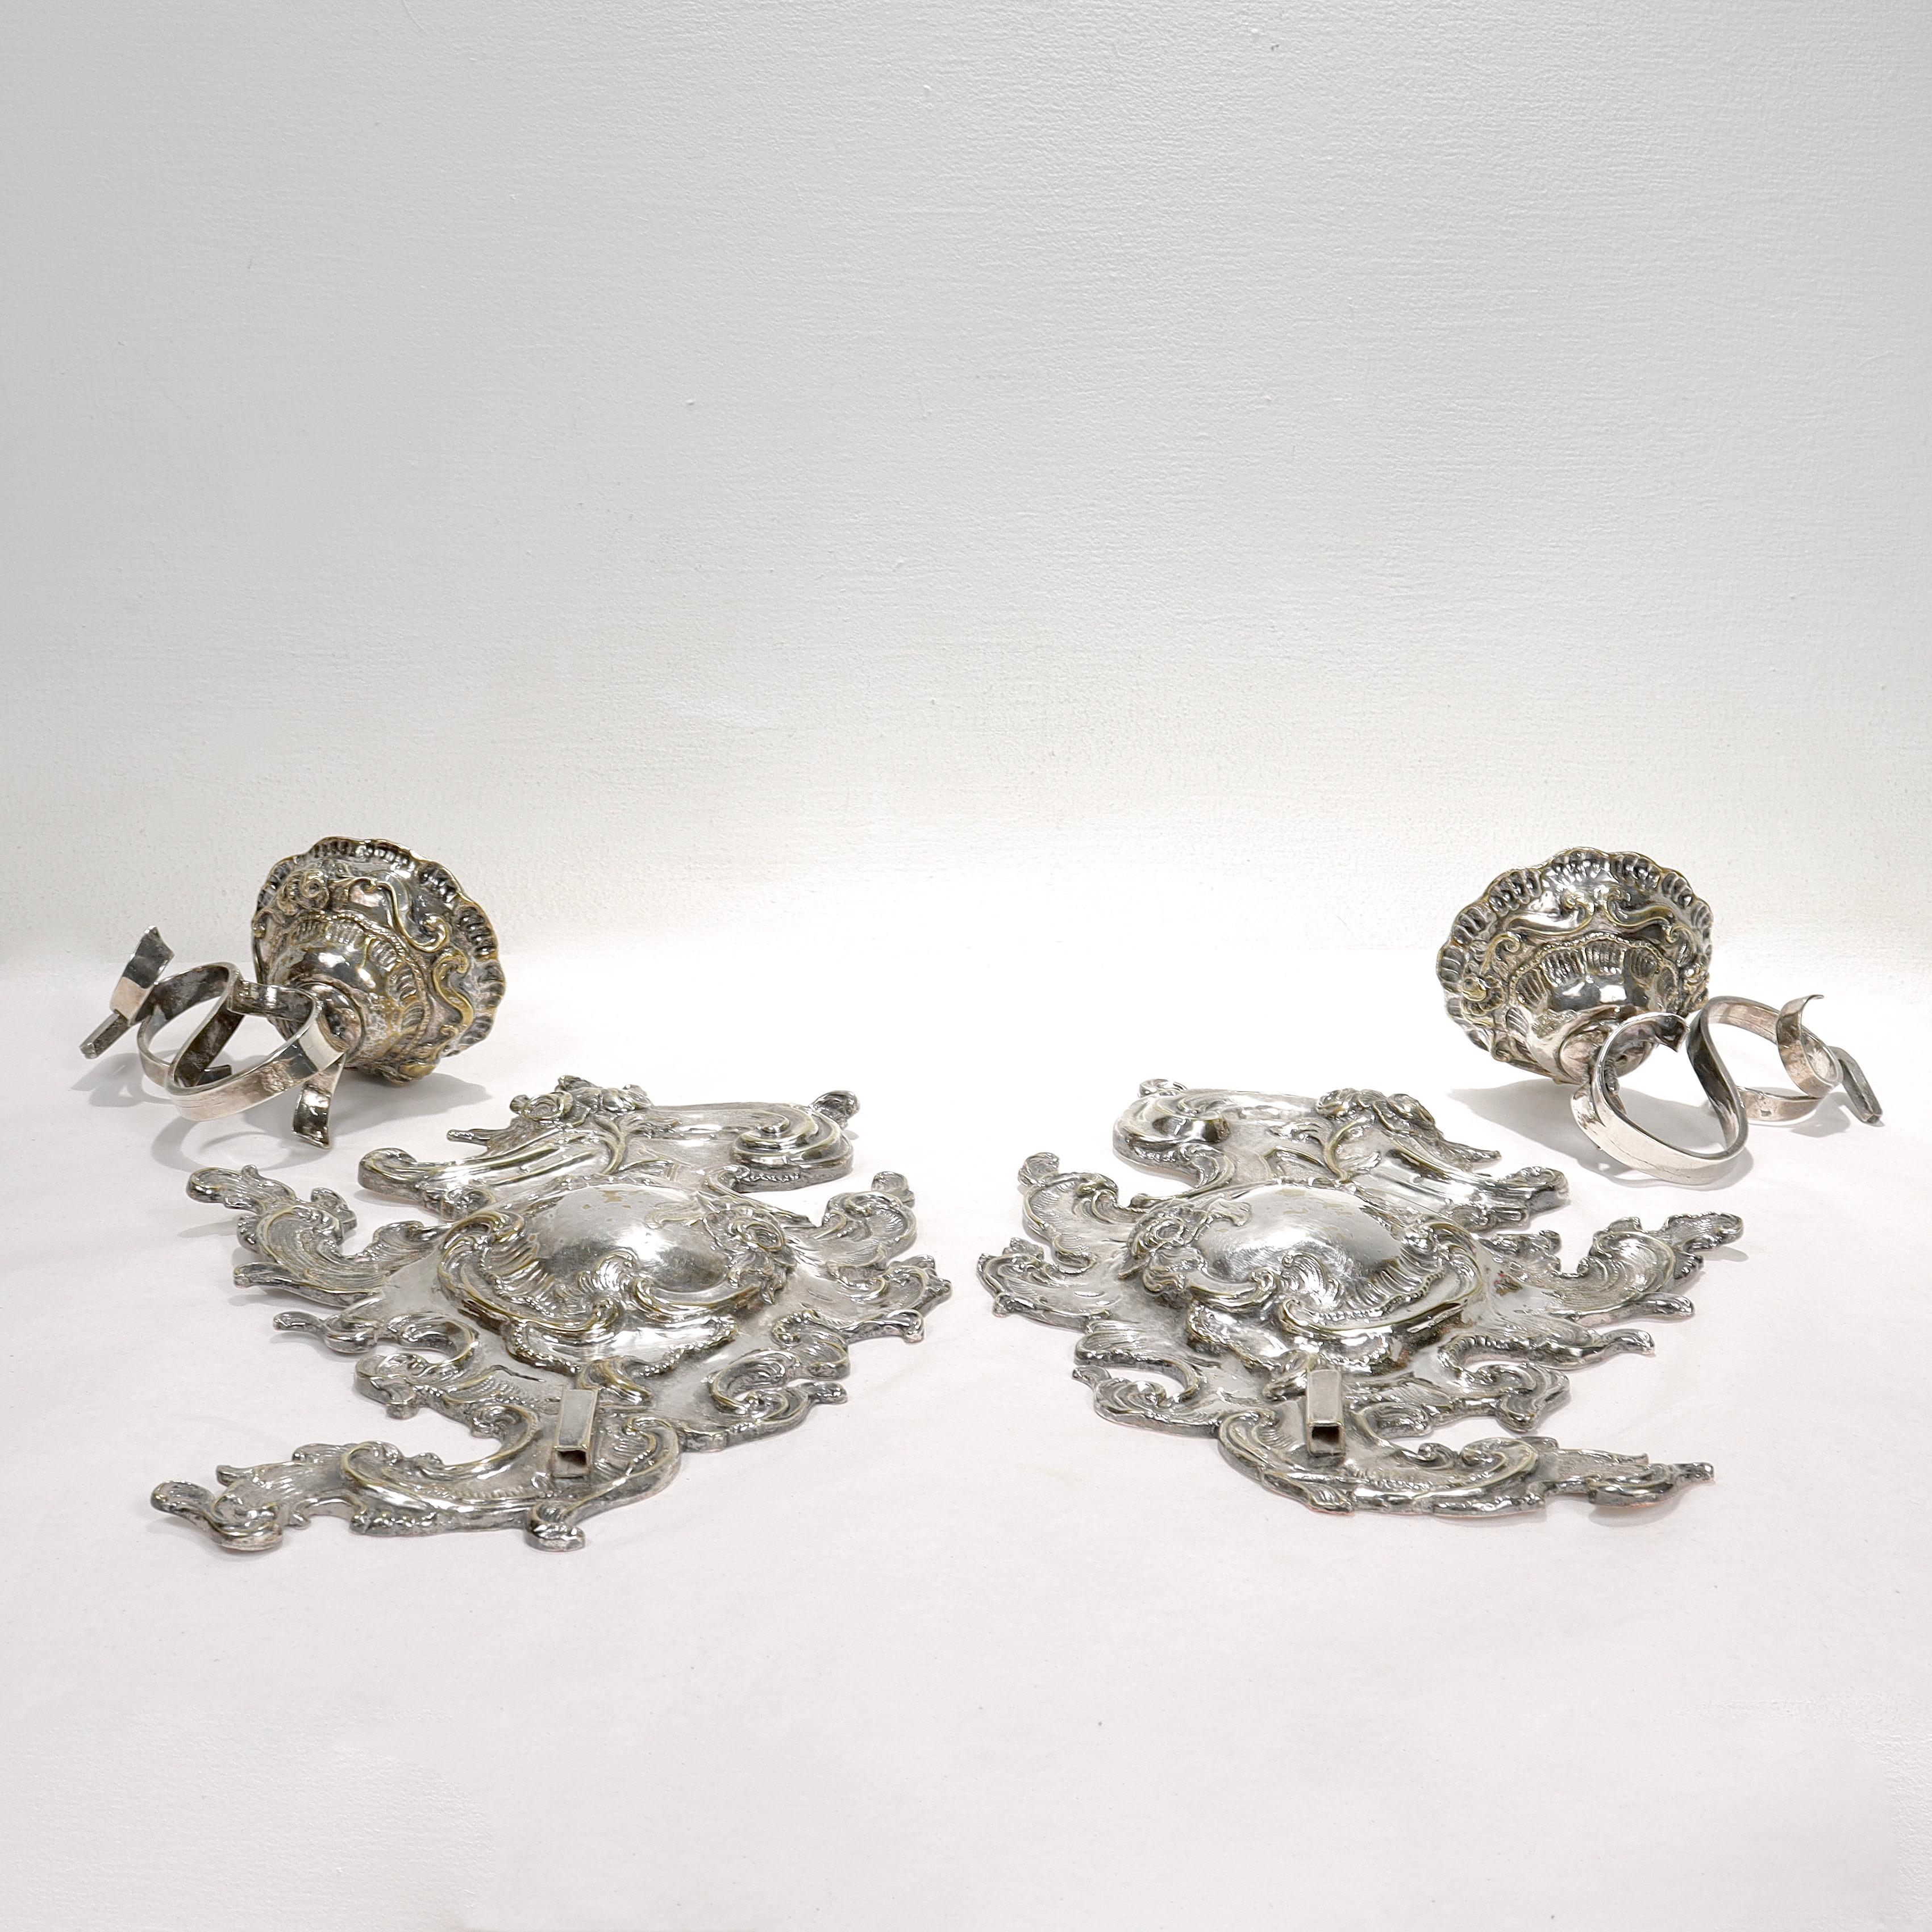 Antique Rococo or Rococo Revival Silver Plated Wall Sconces For Sale 12